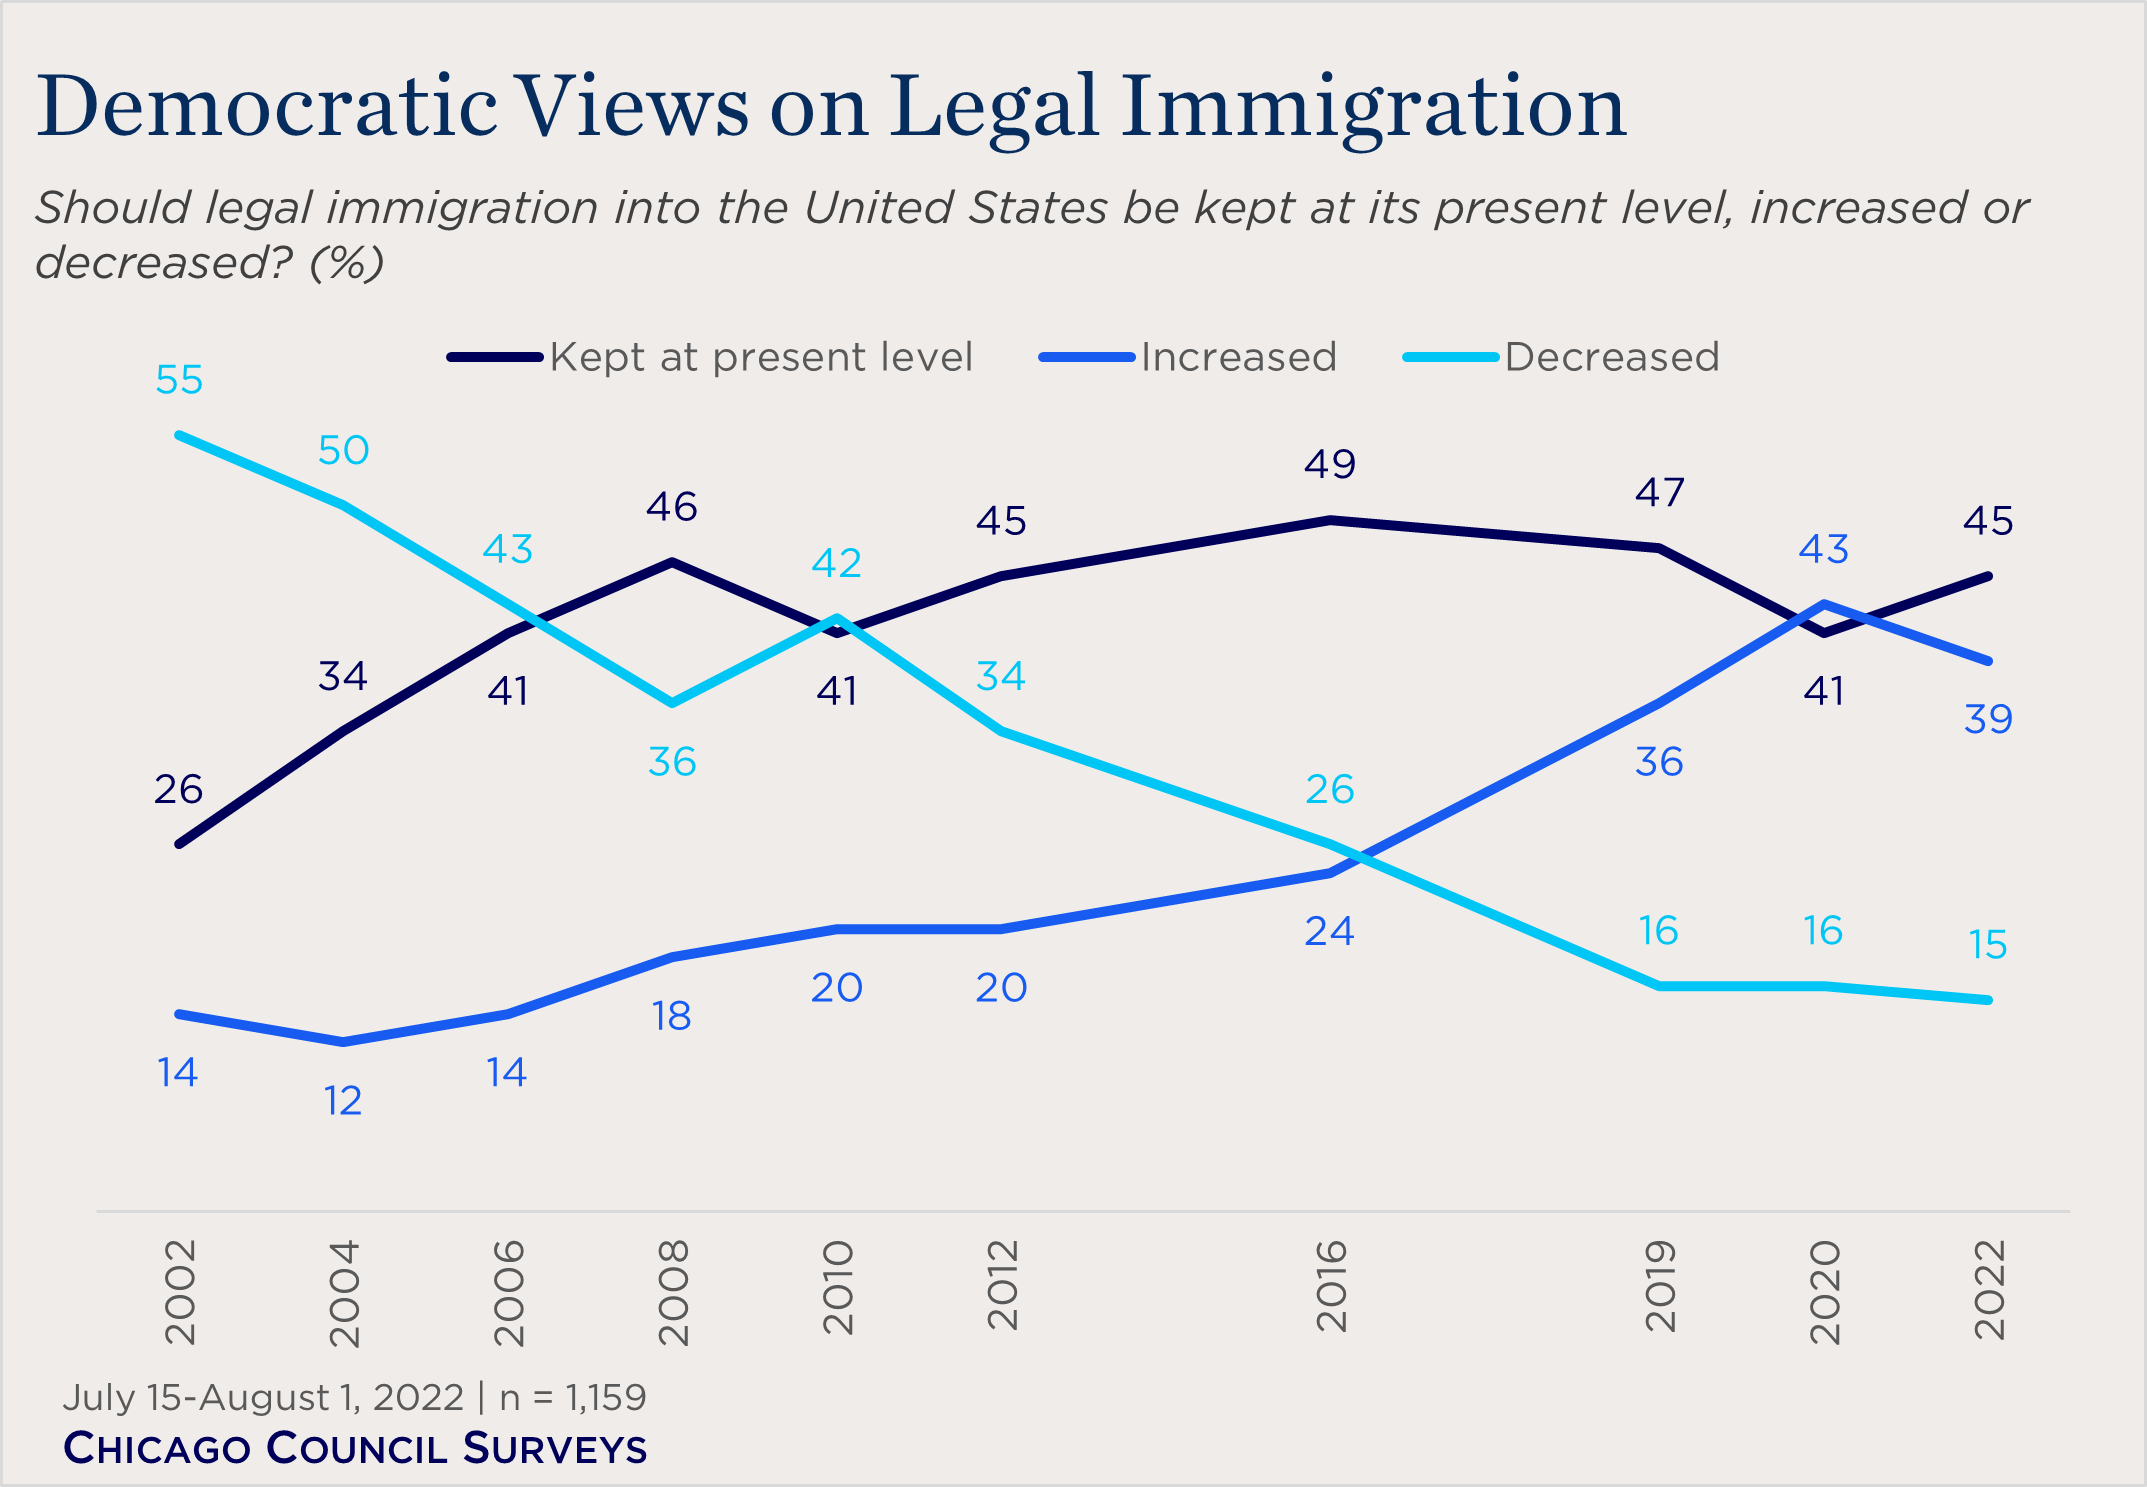 "line chart showing democratic views on legal immigration"